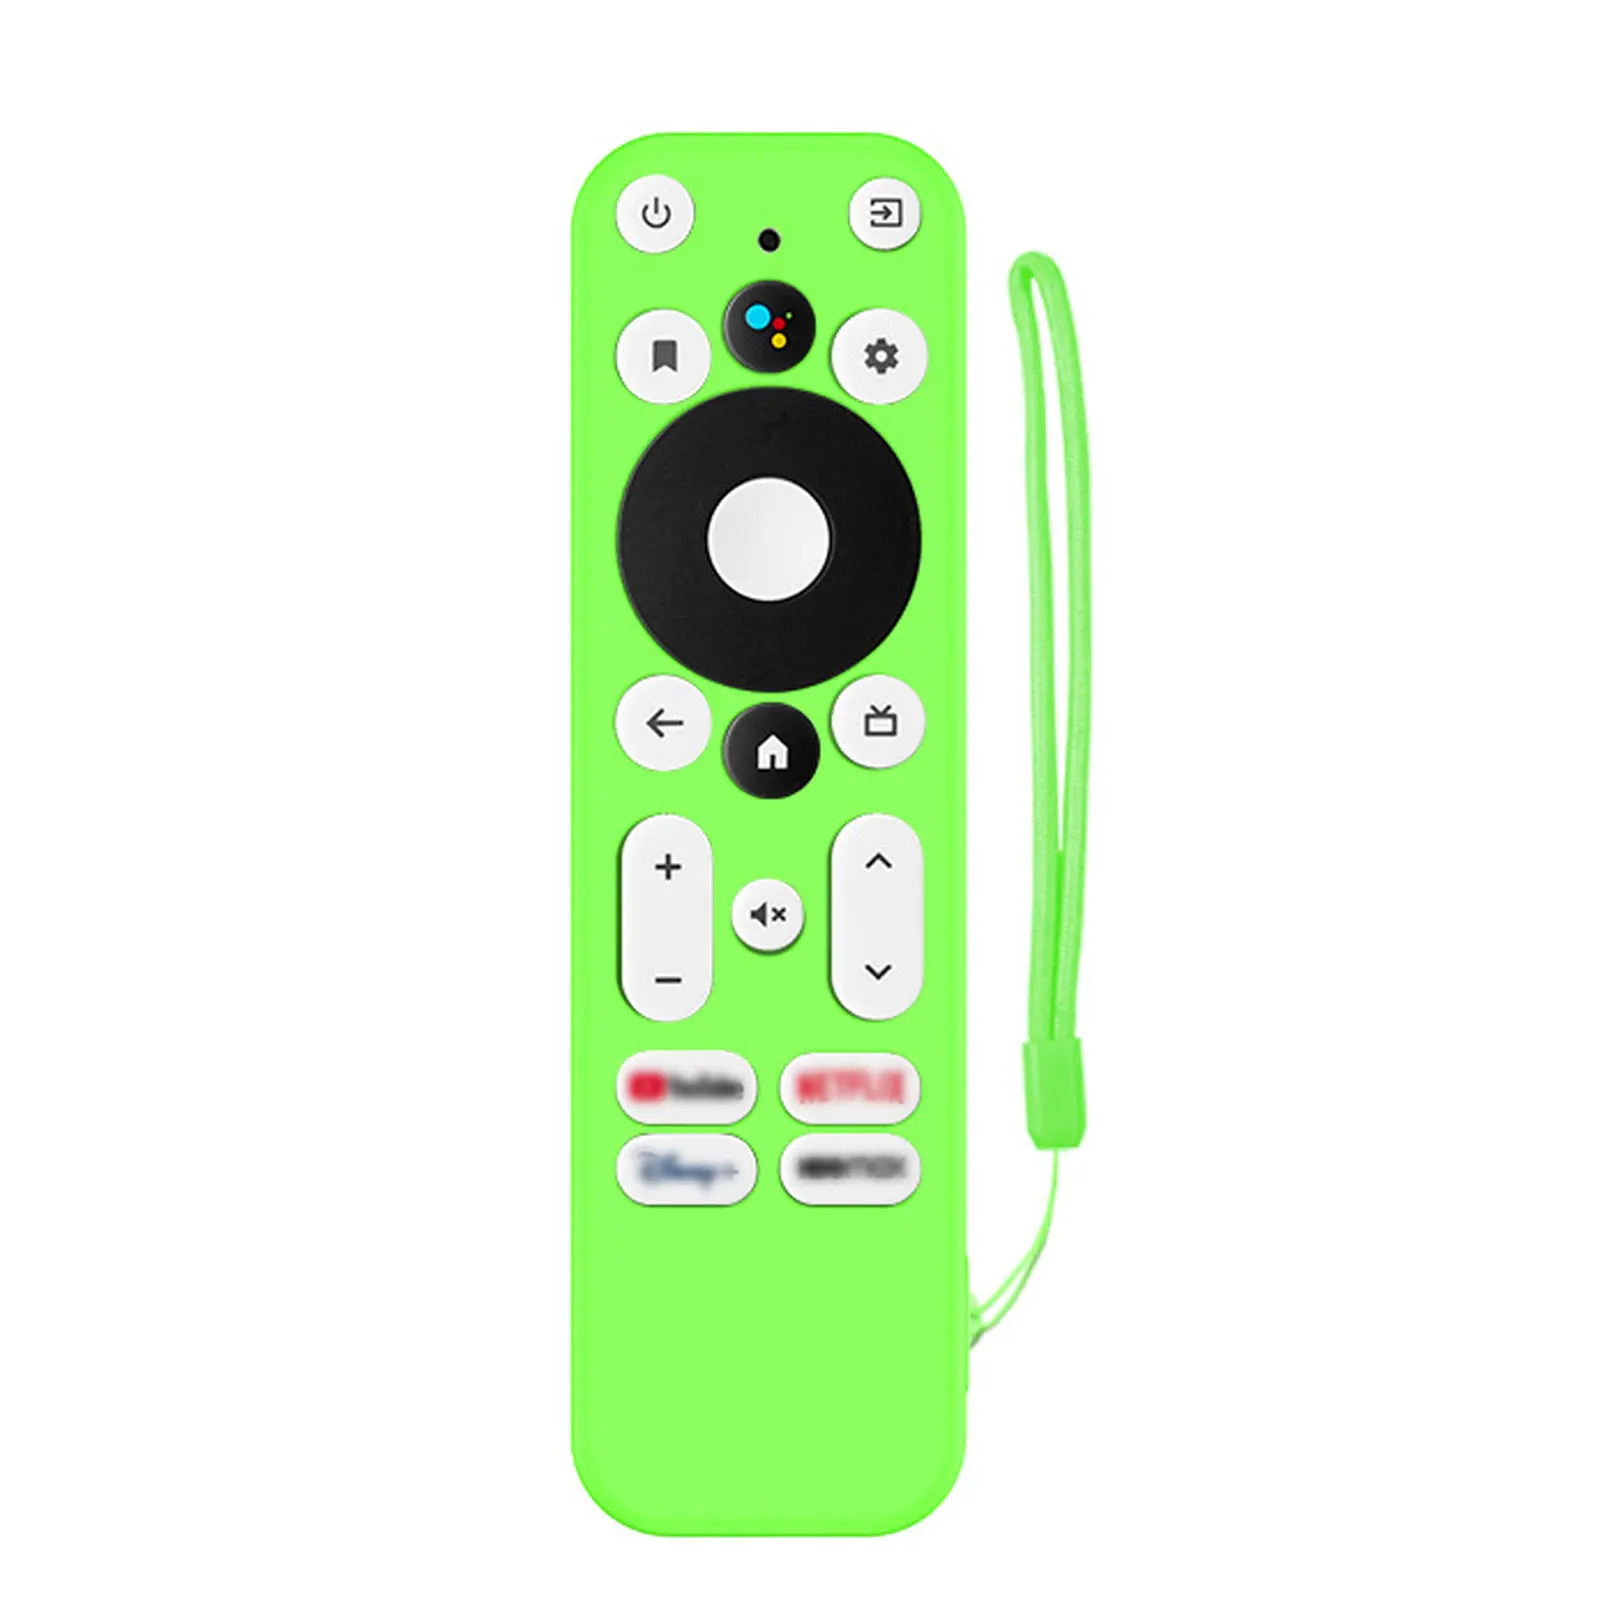 

Protective Case Cover Silicone Sleeve Shockproof Anti-Slip Replacement For TV 2K FHD Streaming Stick Remote Control